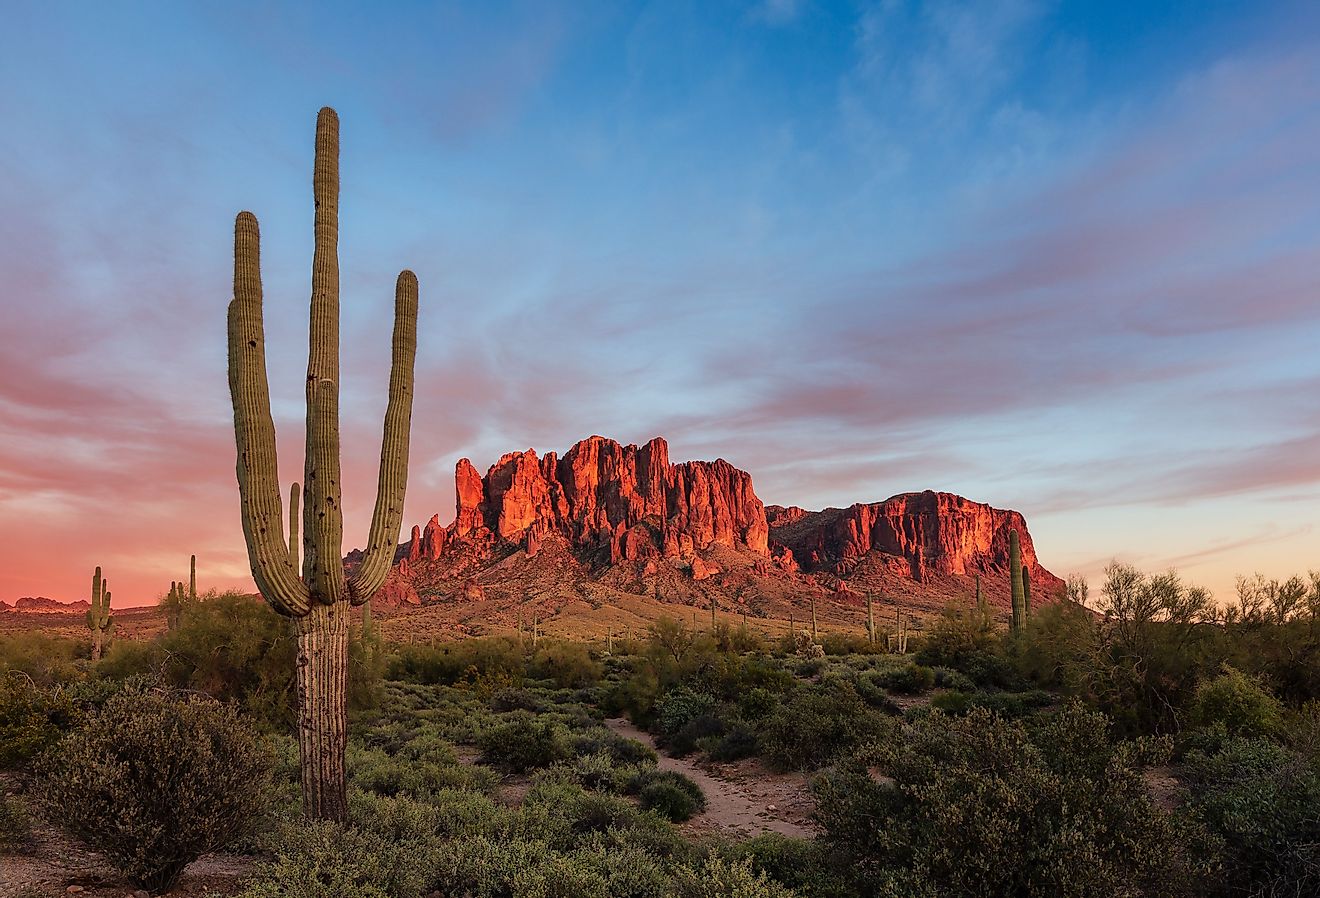 The Superstition Mountains at sunset in Lost Dutchman State Park, Arizona.